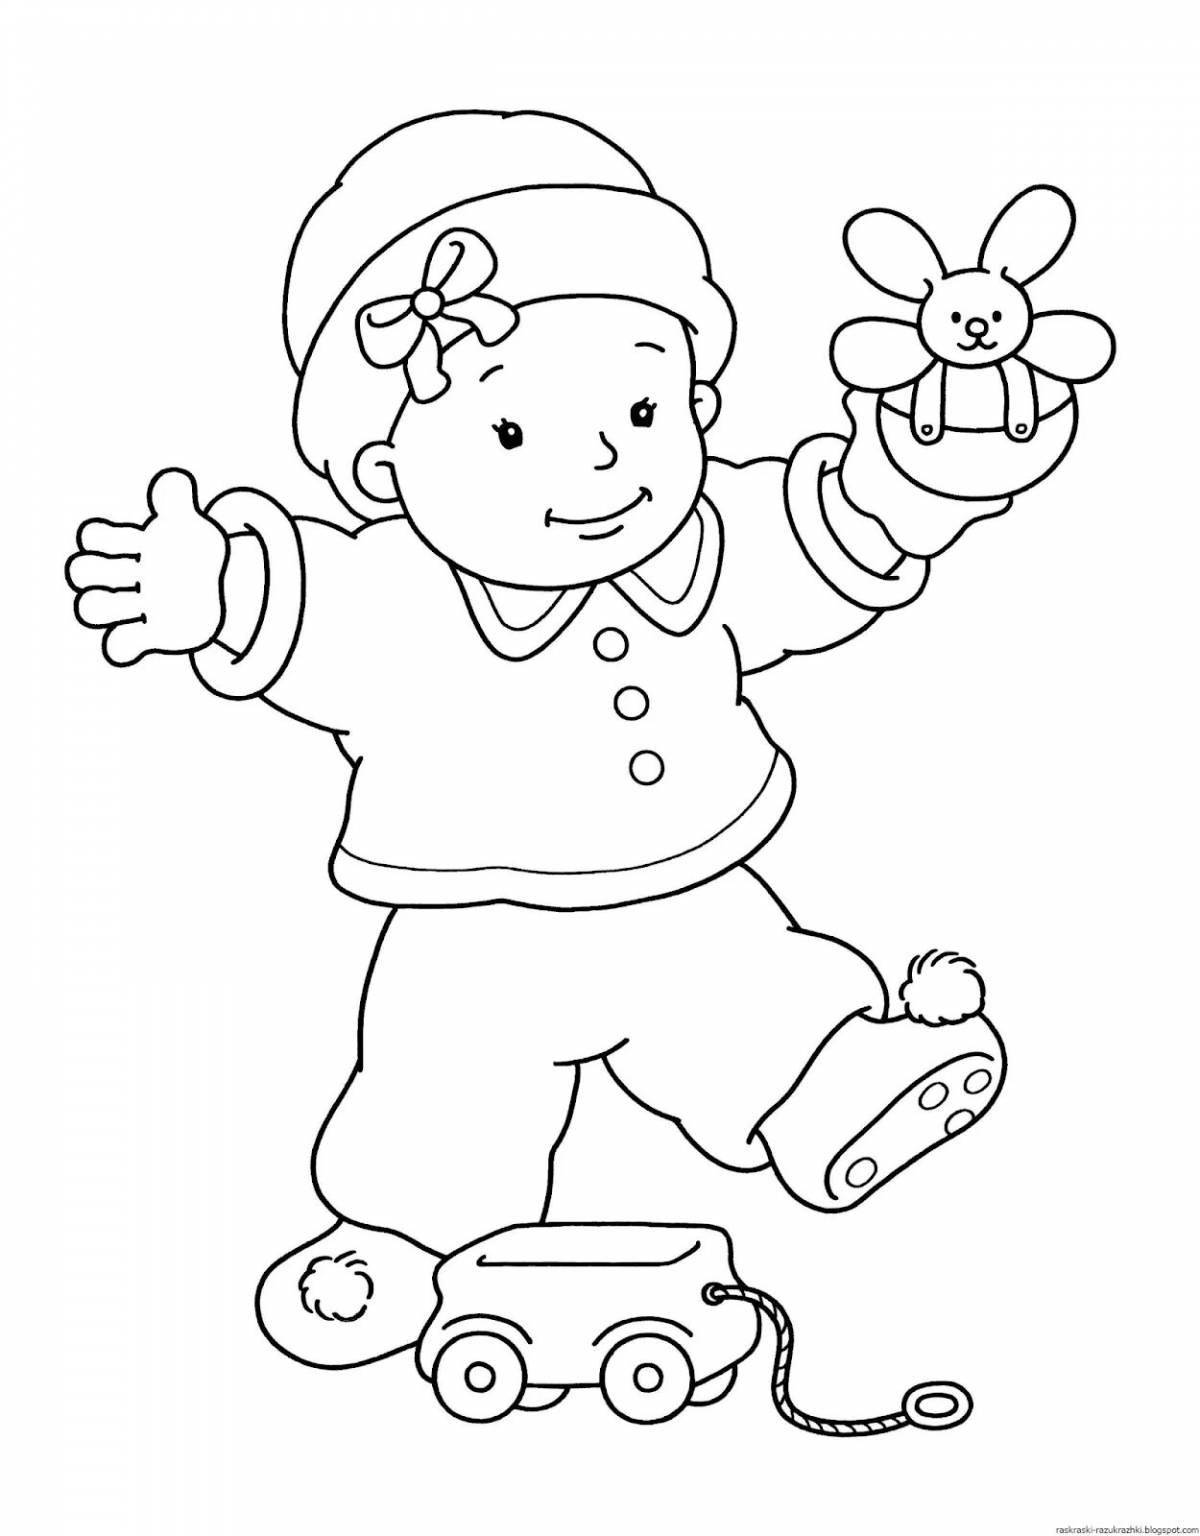 Fun coloring book for little kids